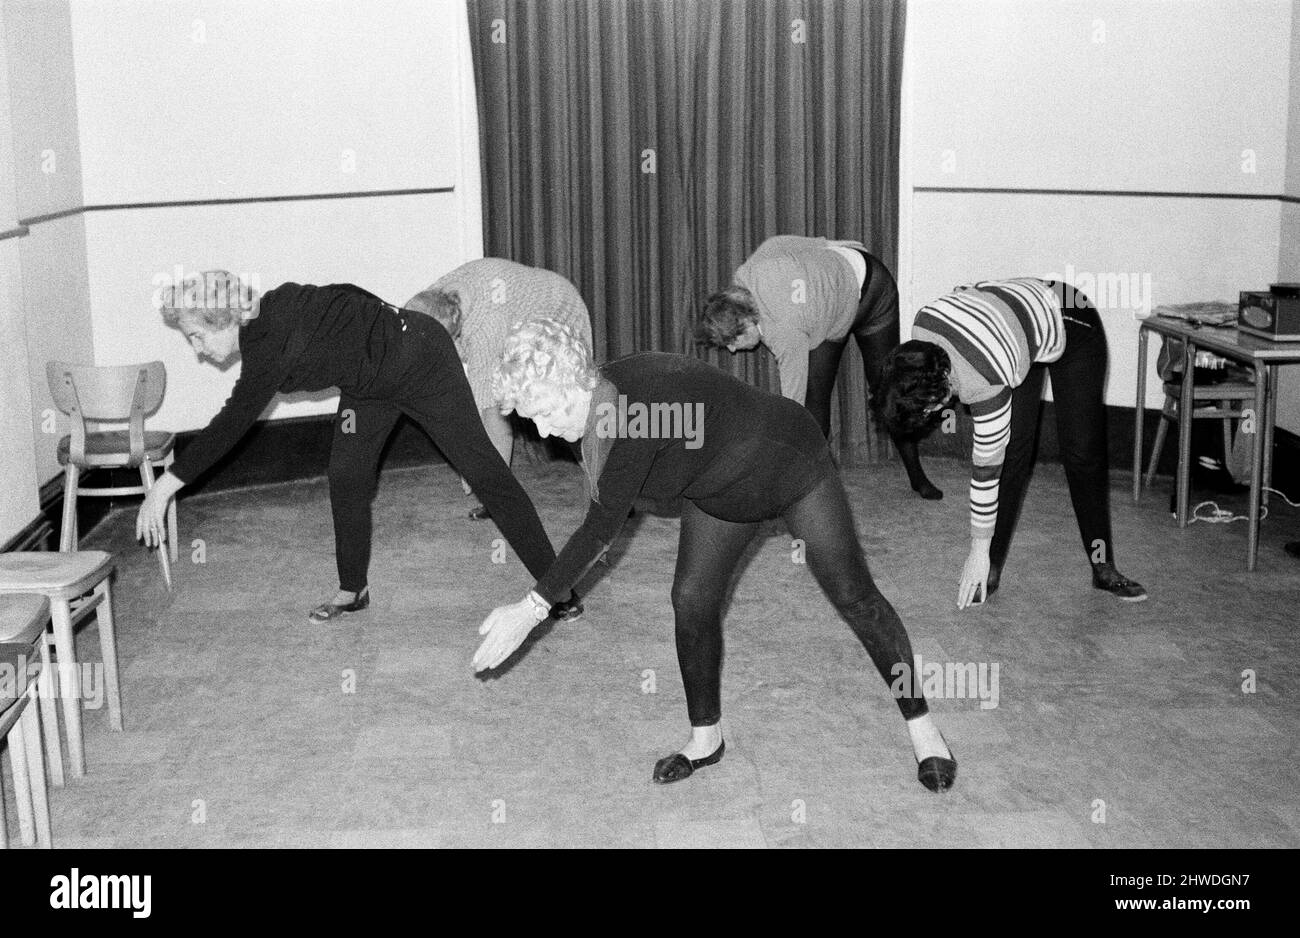 Cornwall's most amazing grandmother, Mrs Mary Wyatt (75 next April) dances her way into the new decade of the 1970s, clad in black dancing tights showing a class of women how to do energetic and athletic arm and leg stretches to music. Mrs Wyatt held her first Keep Fit class of the 1970s at the Community Rooms at the Guildhall in St Ives, Cornwall. 2nd January 1970.Cornwall's most amazing grandmother, Mrs Mary Wyatt (75 next April) dances her way into the new decade of the 1970s, clad in black dancing tights showing a class of women how to do energetic and athletic arm and leg stretches to mus Stock Photo